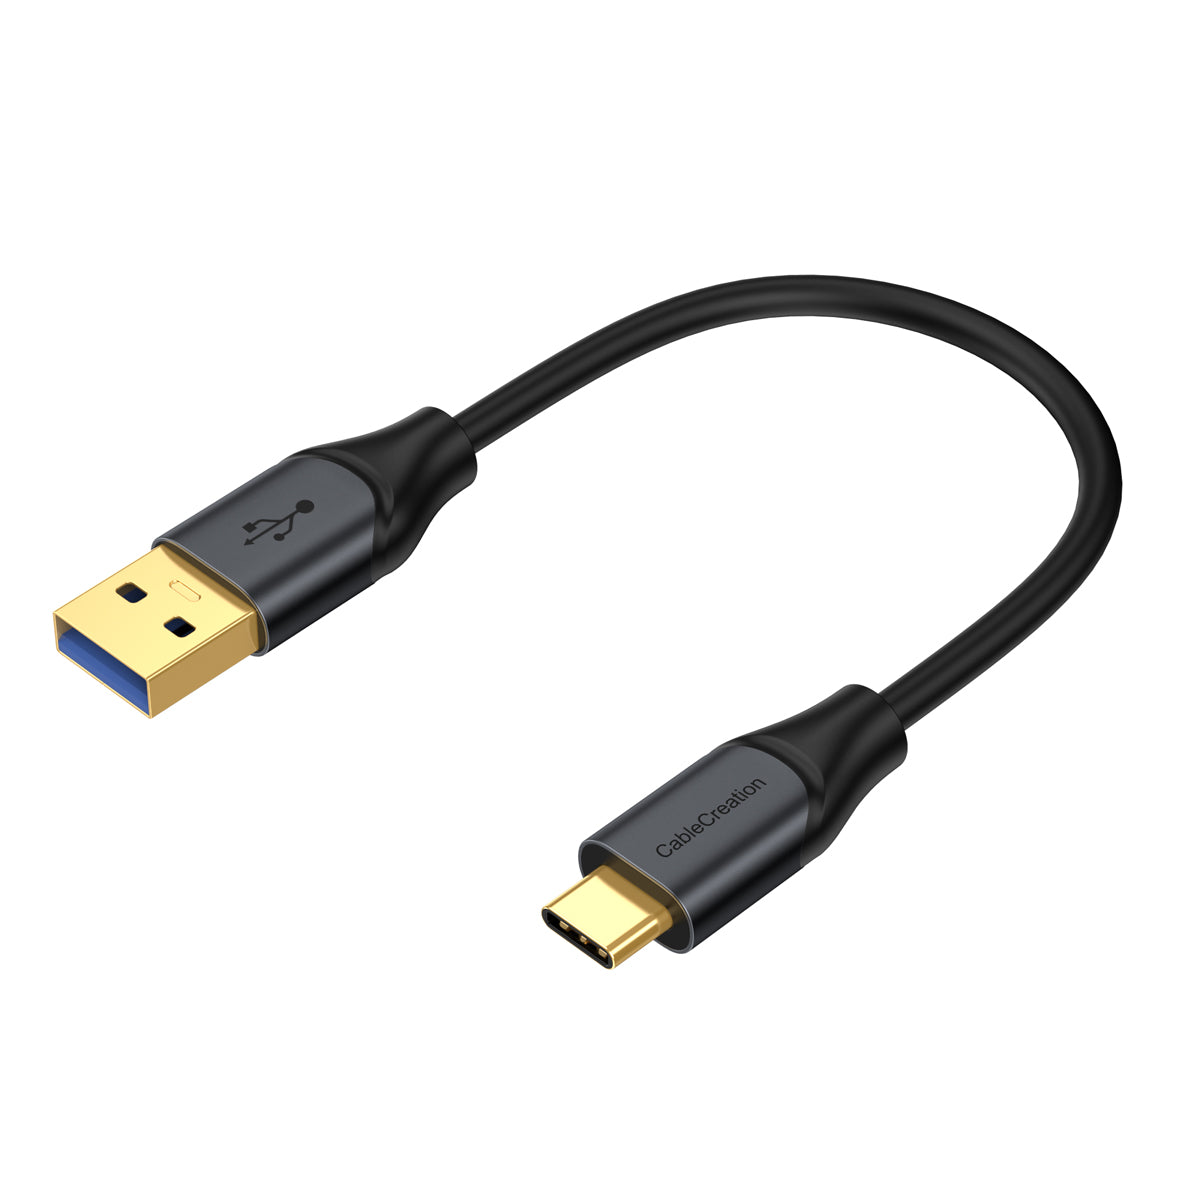 Cable Matters Braided USB C to Micro USB Cable 3.3 ft (Micro USB to USB-C  Cable, USB Type C to Micro USB Cable), Black